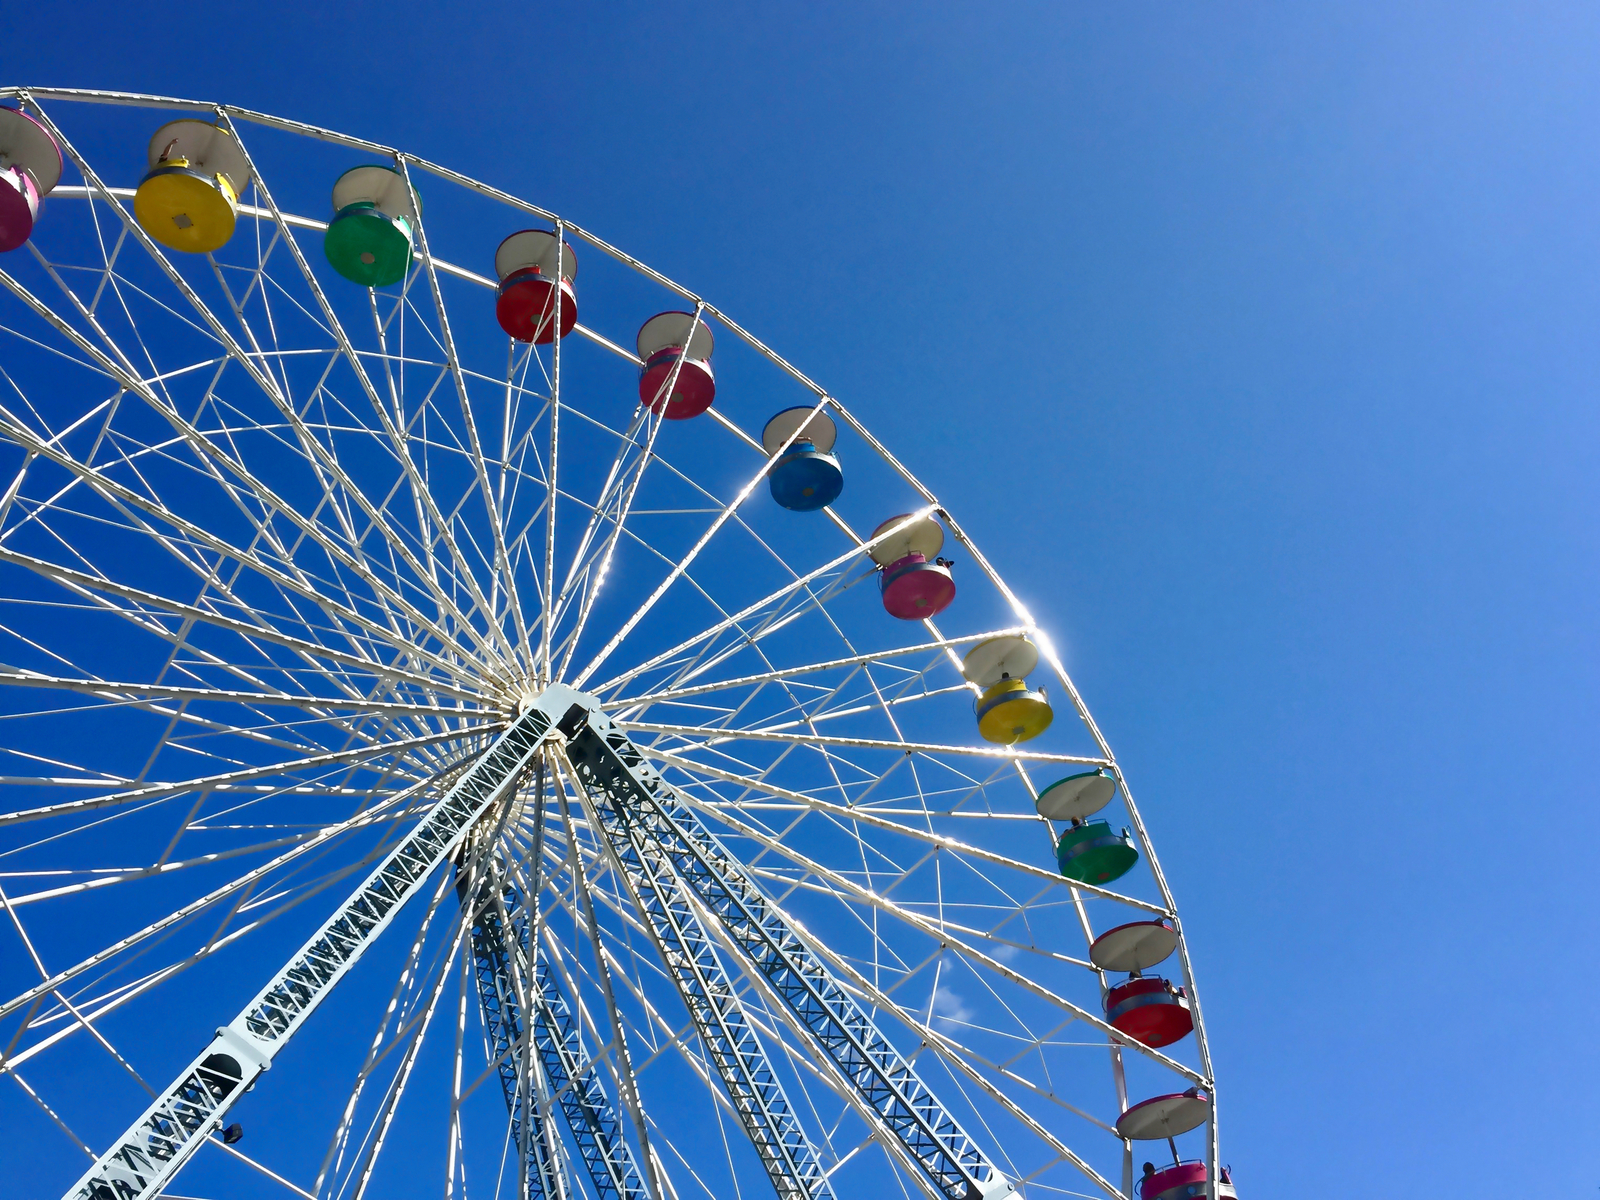 Pictured in worm's-eye view as a piece on the best things to do in Pennsylvania, the gigantic Ferris Wheel at Knoebels Amusement Resort on a clear day